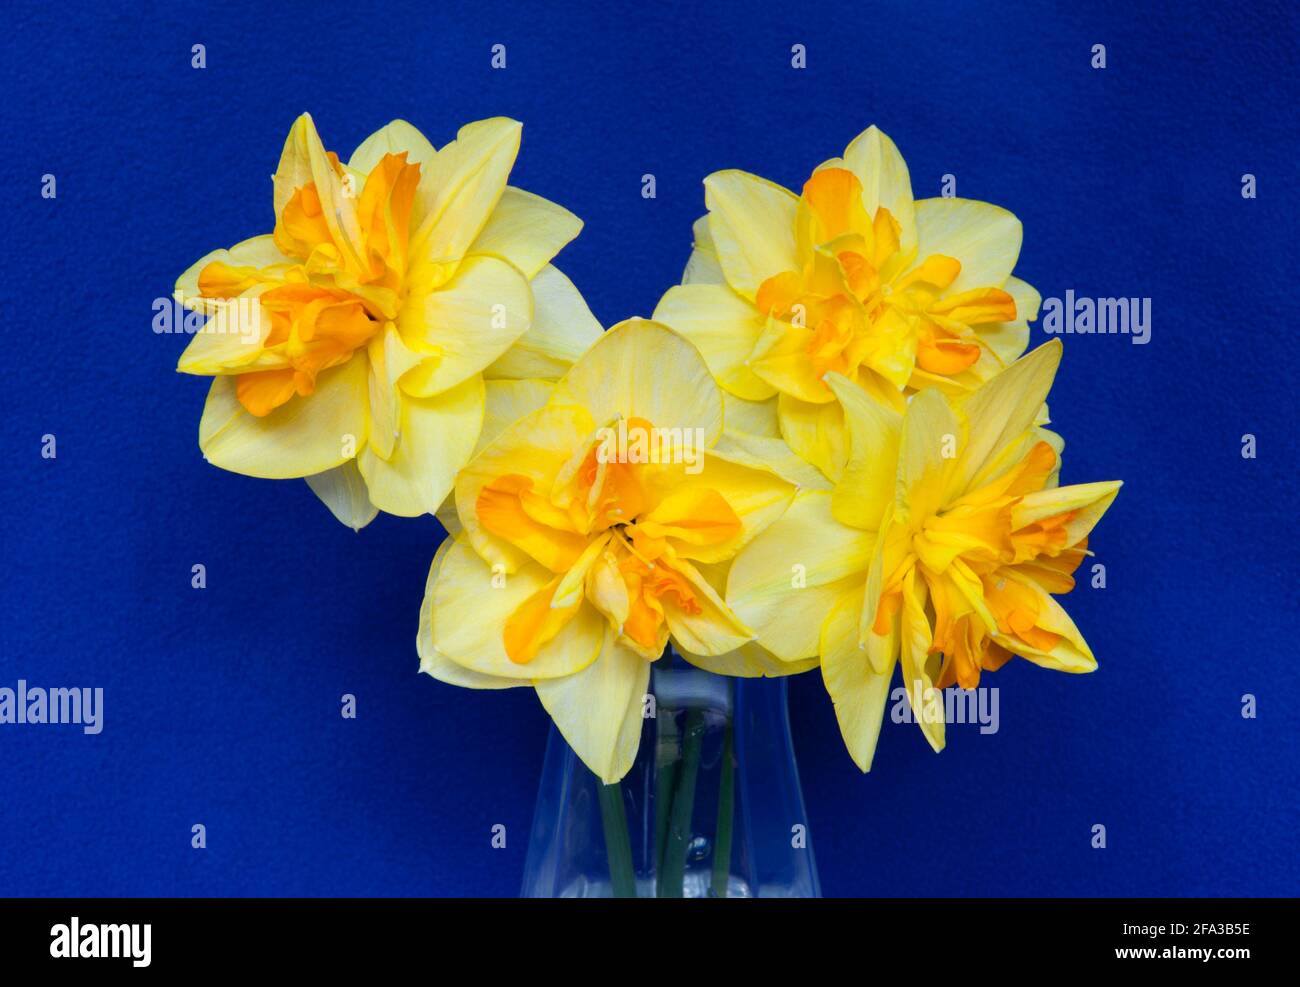 Study of yellow Daffodils on a purple background Stock Photo